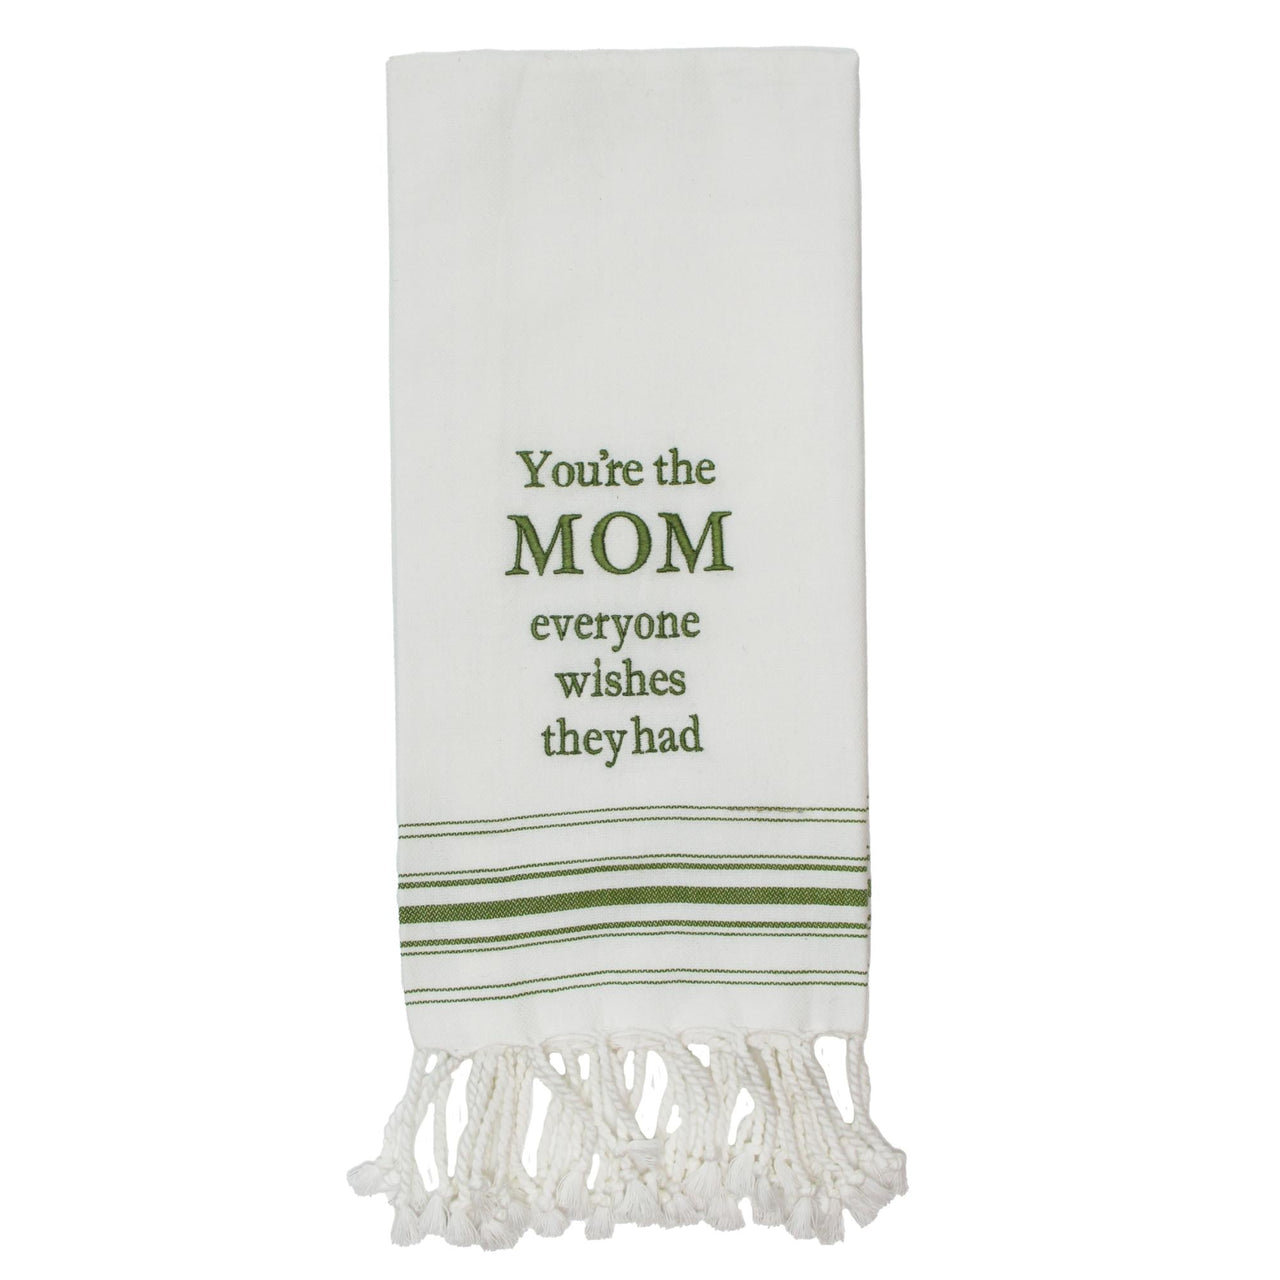 Grn You're the Mom Towel - Interiors by Elizabeth